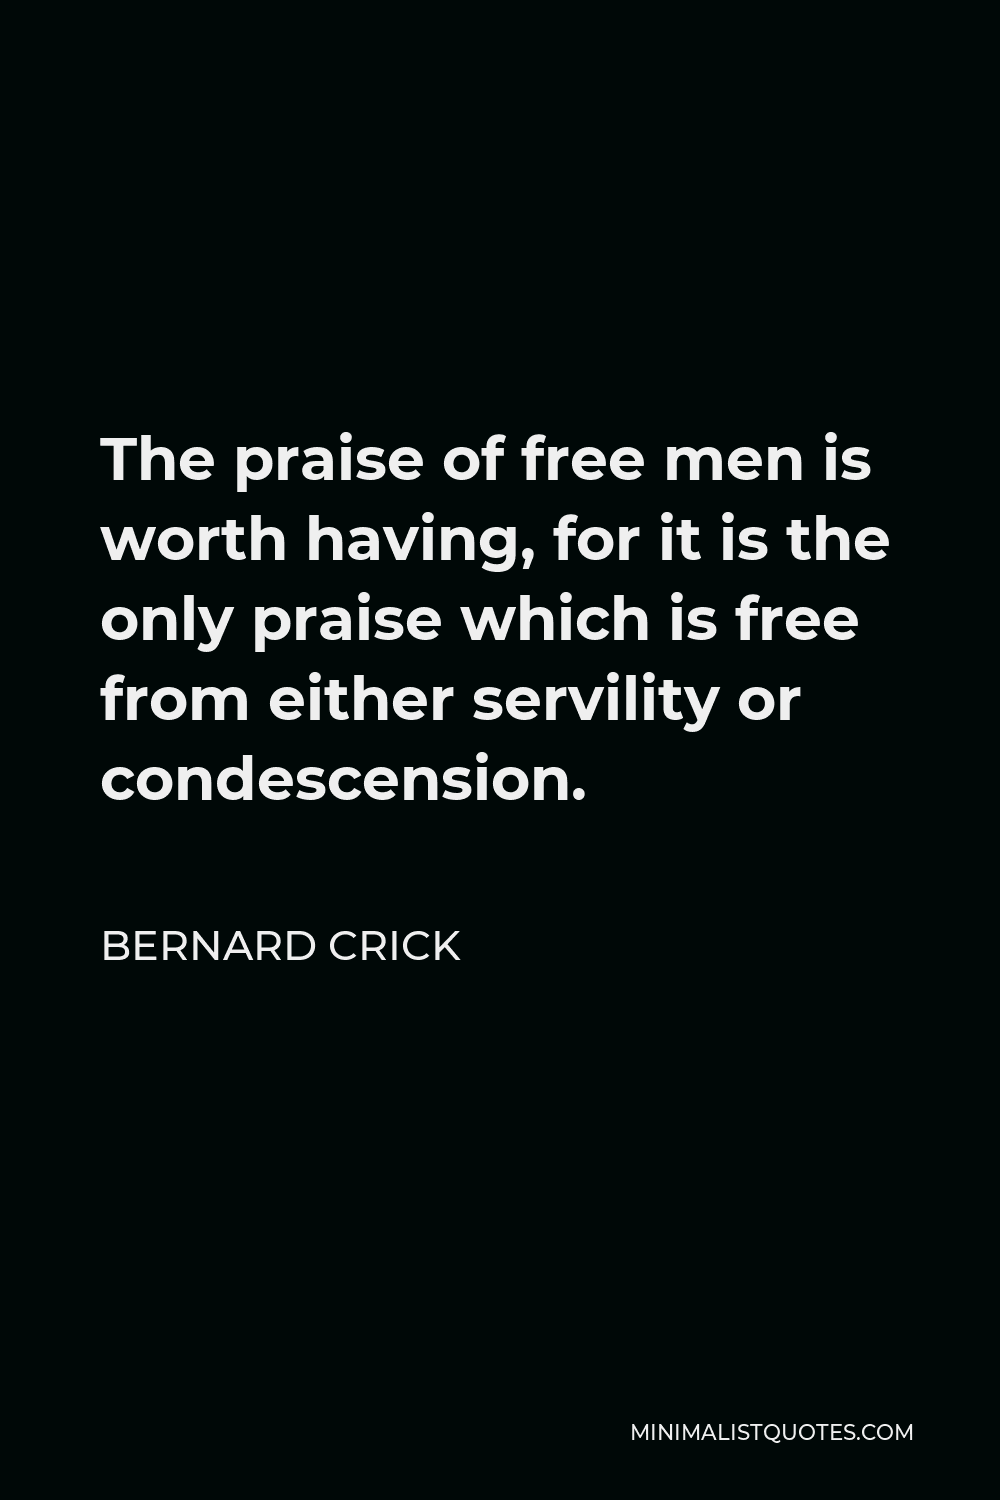 Bernard Crick Quote - The praise of free men is worth having, for it is the only praise which is free from either servility or condescension.